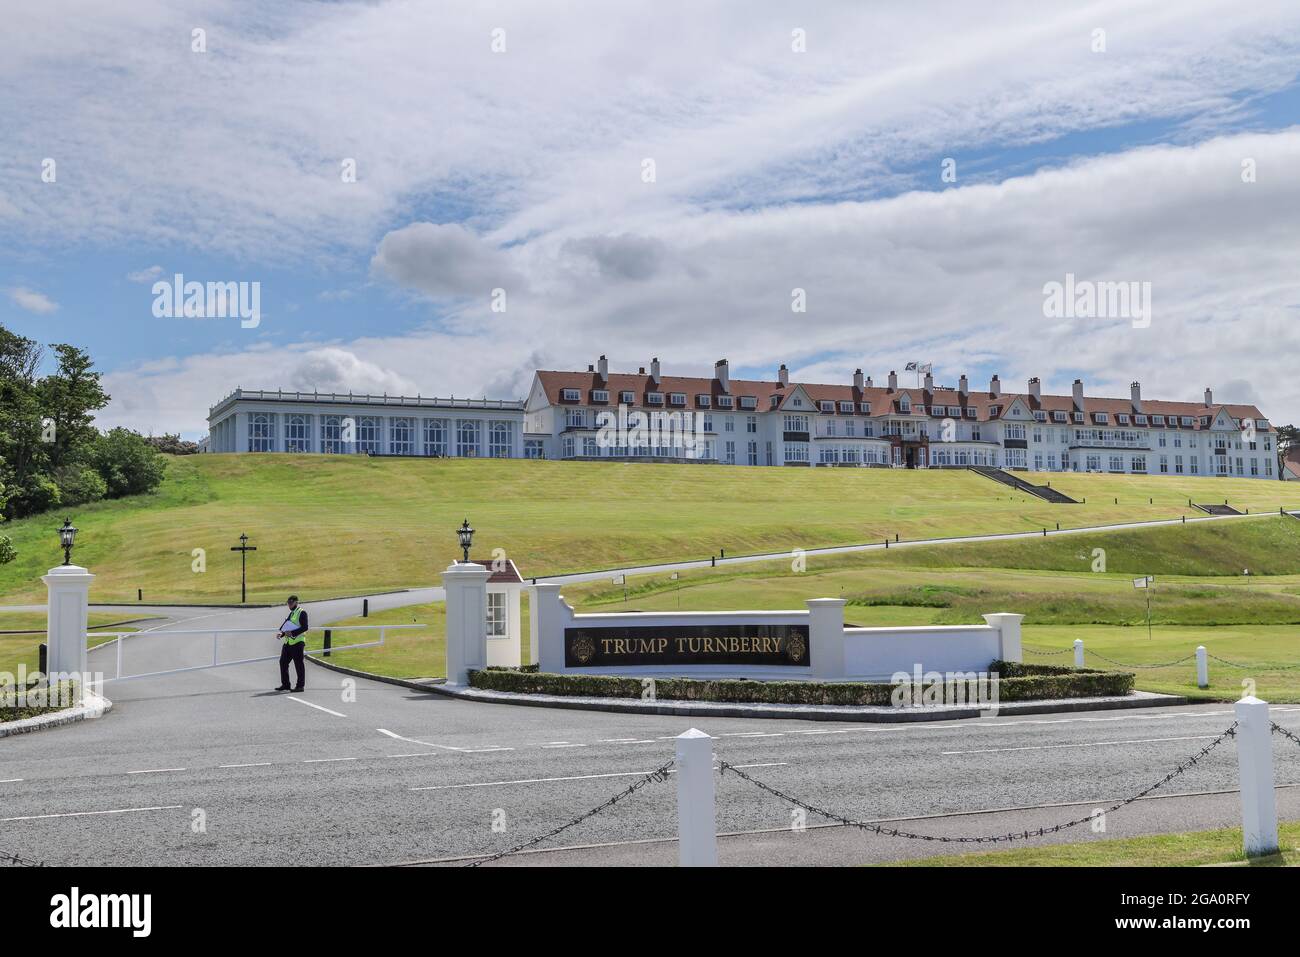 Entrance to the Trump Turnberry hotel and golf course in South Ayrshire, Scotland, UK Stock Photo